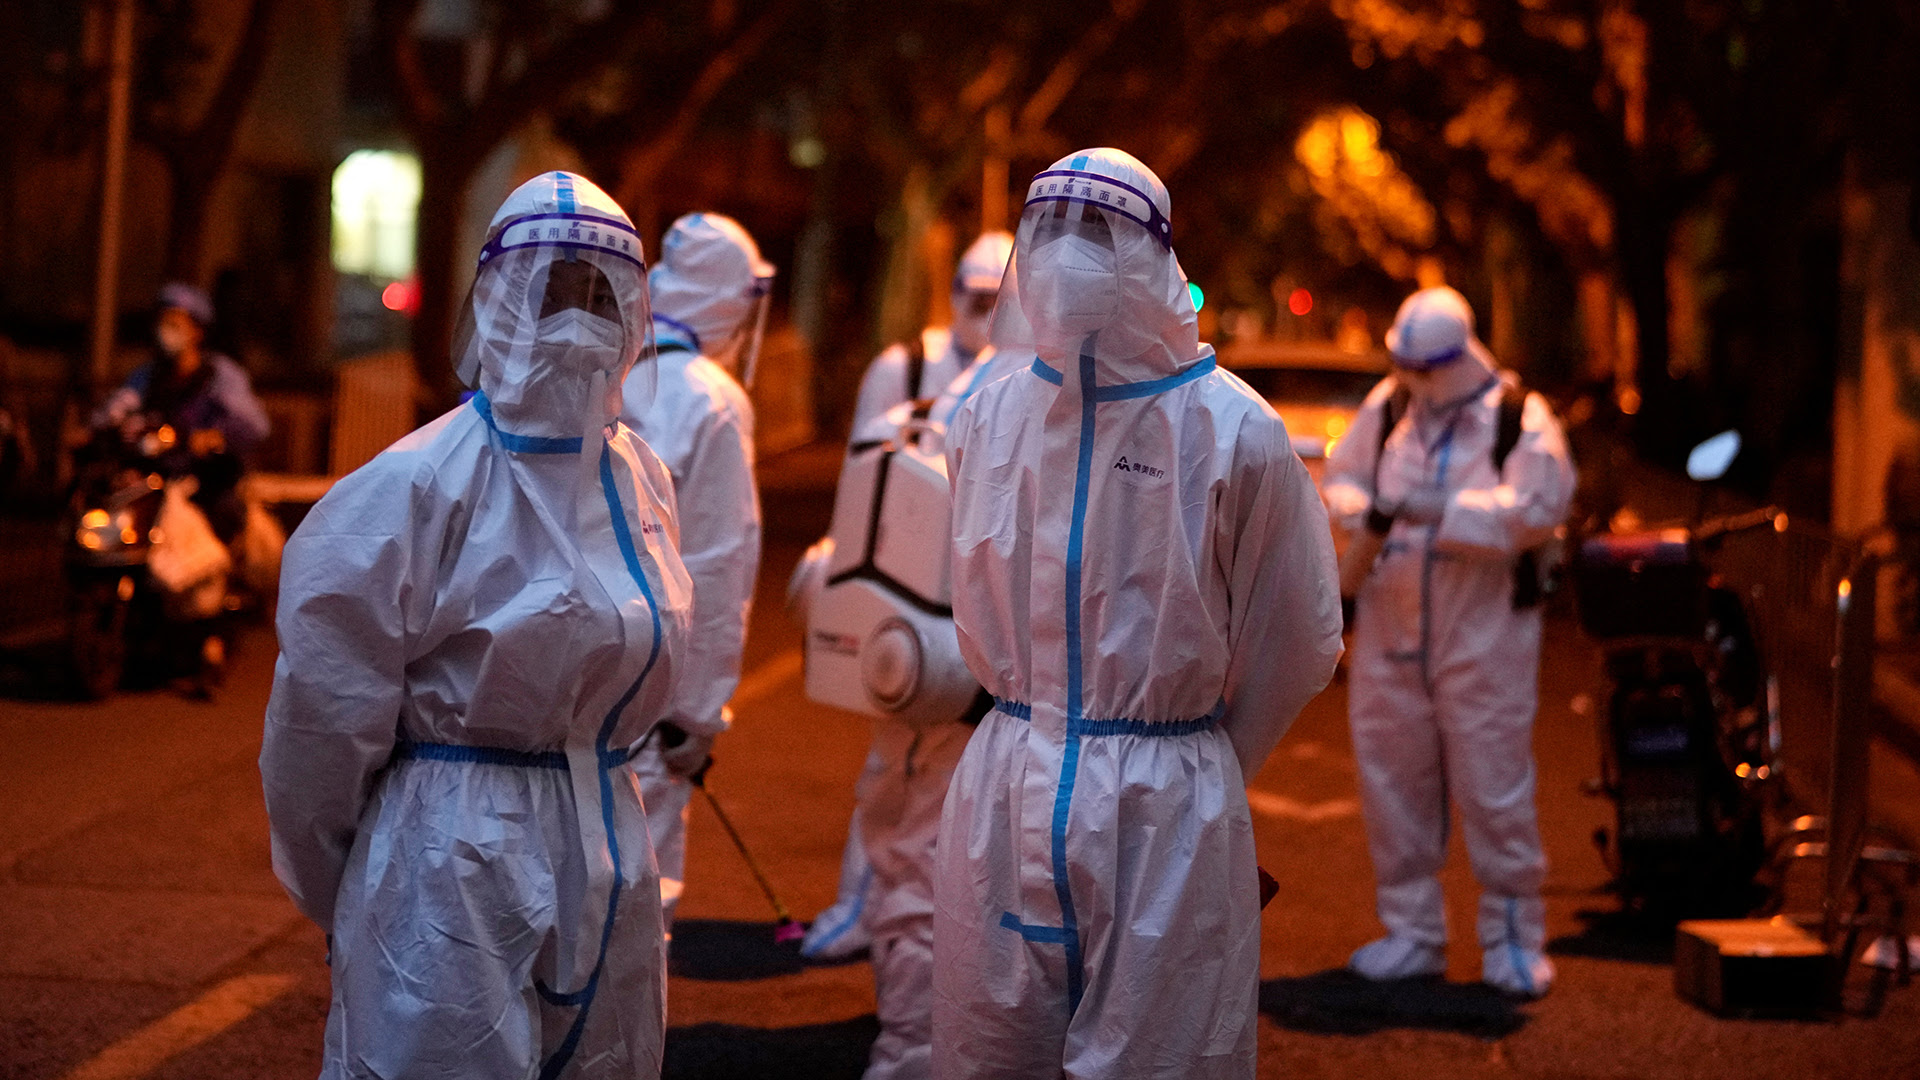 Workers in protective suits stand at a closed residential area during lockdown, amid the coronavirus disease (COVID-19) outbreak, in Shanghai, China, May 23, 2022 (Credit: Aly Song/Reuters)